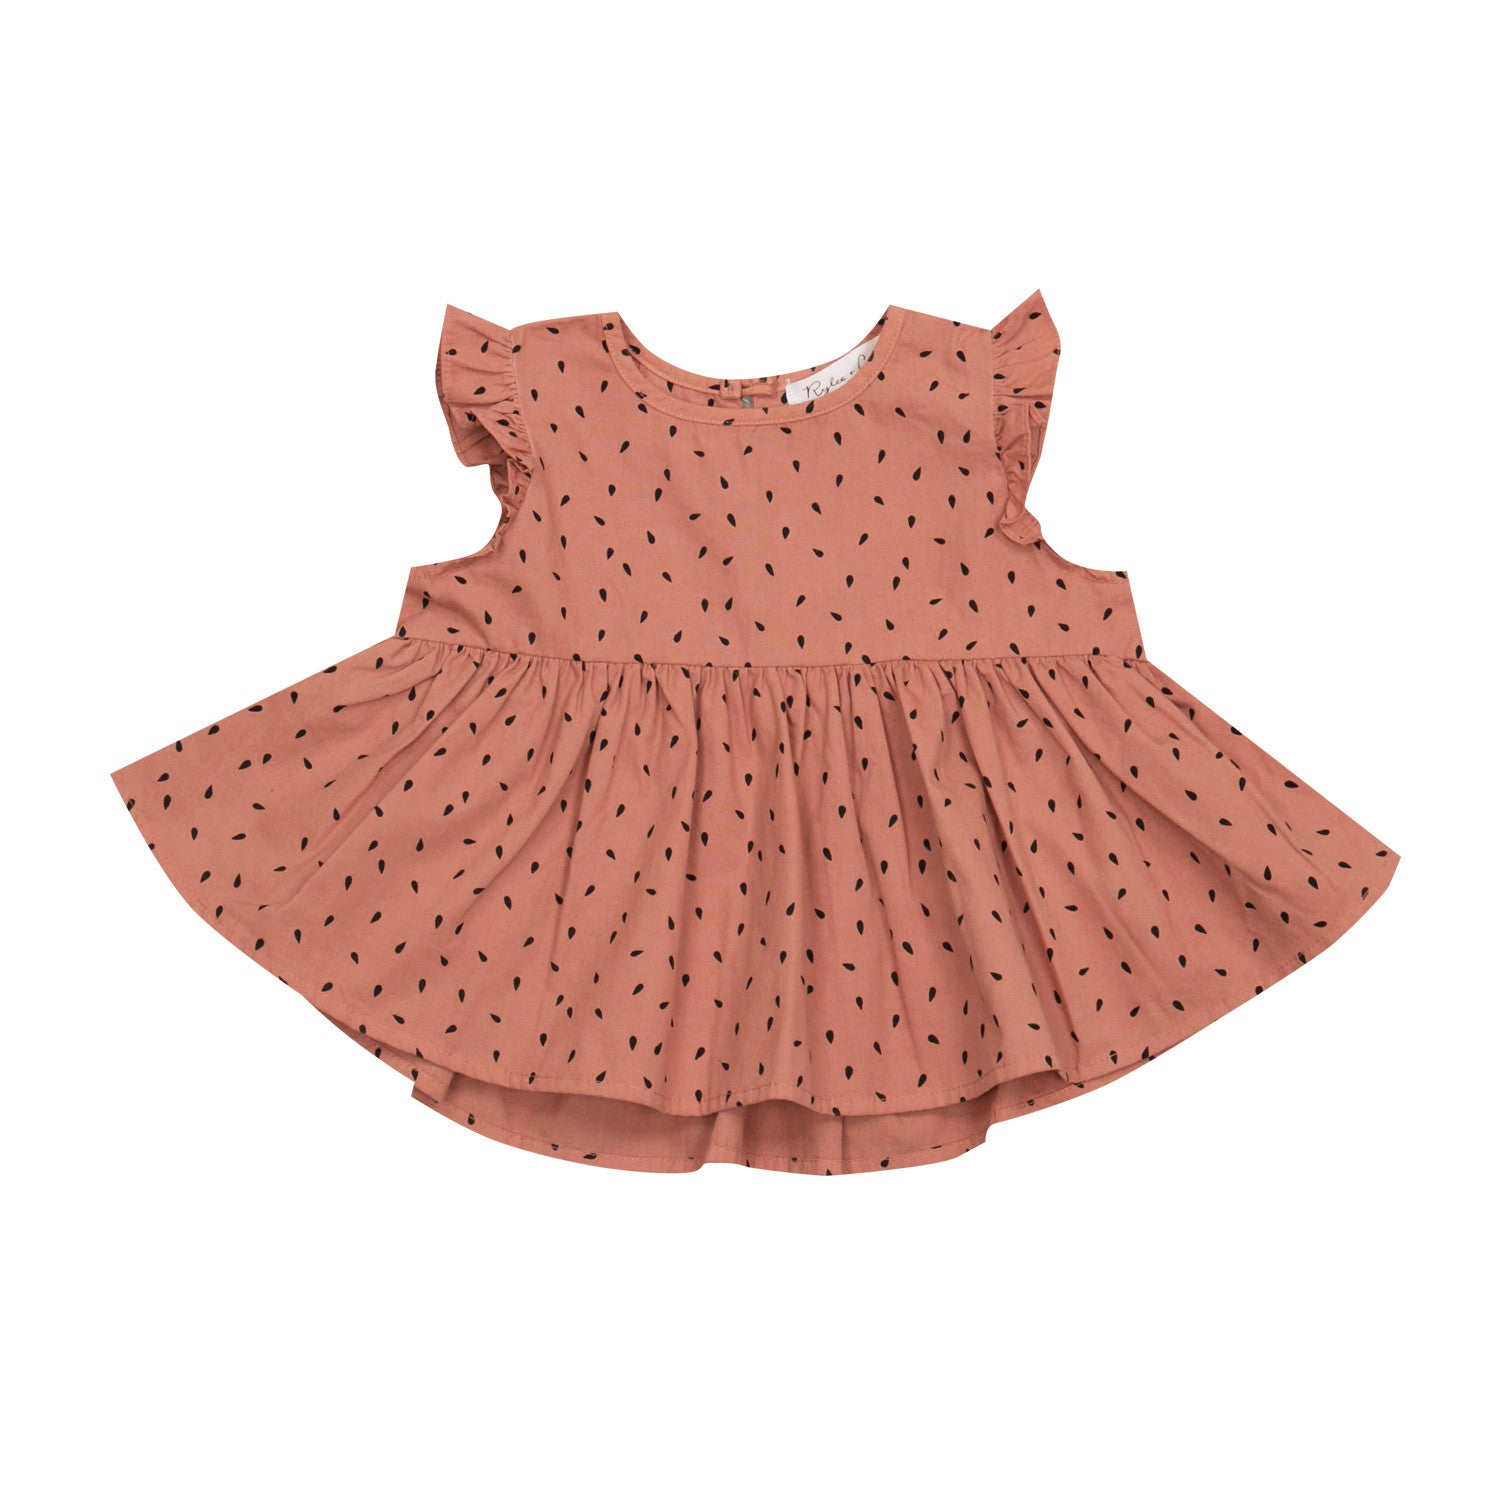 Apple Seed dress and bloomer set